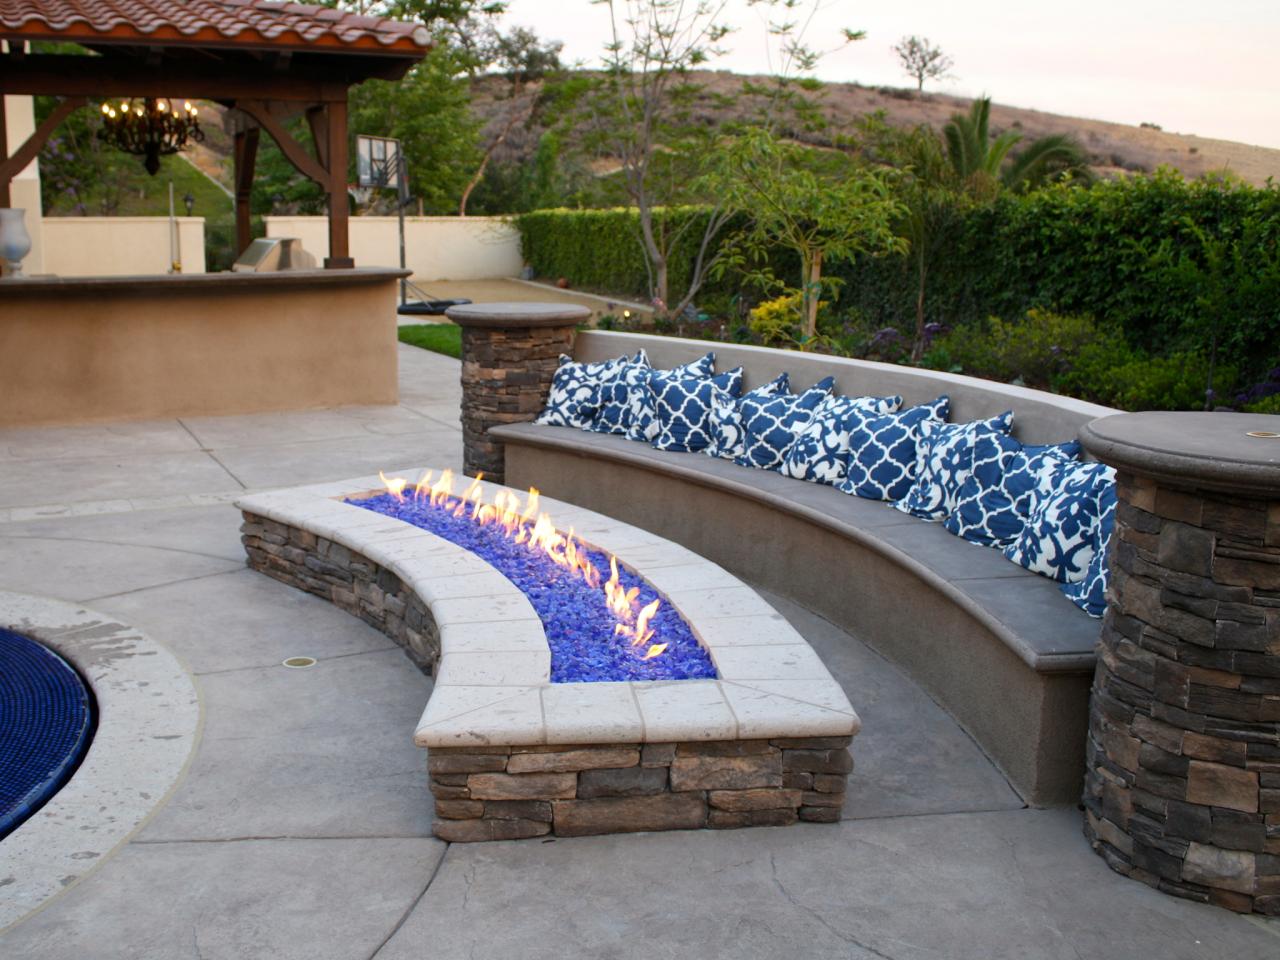 Designing A Patio Around Fire Pit Diy, Curved Fire Pit Bench With Back Plans